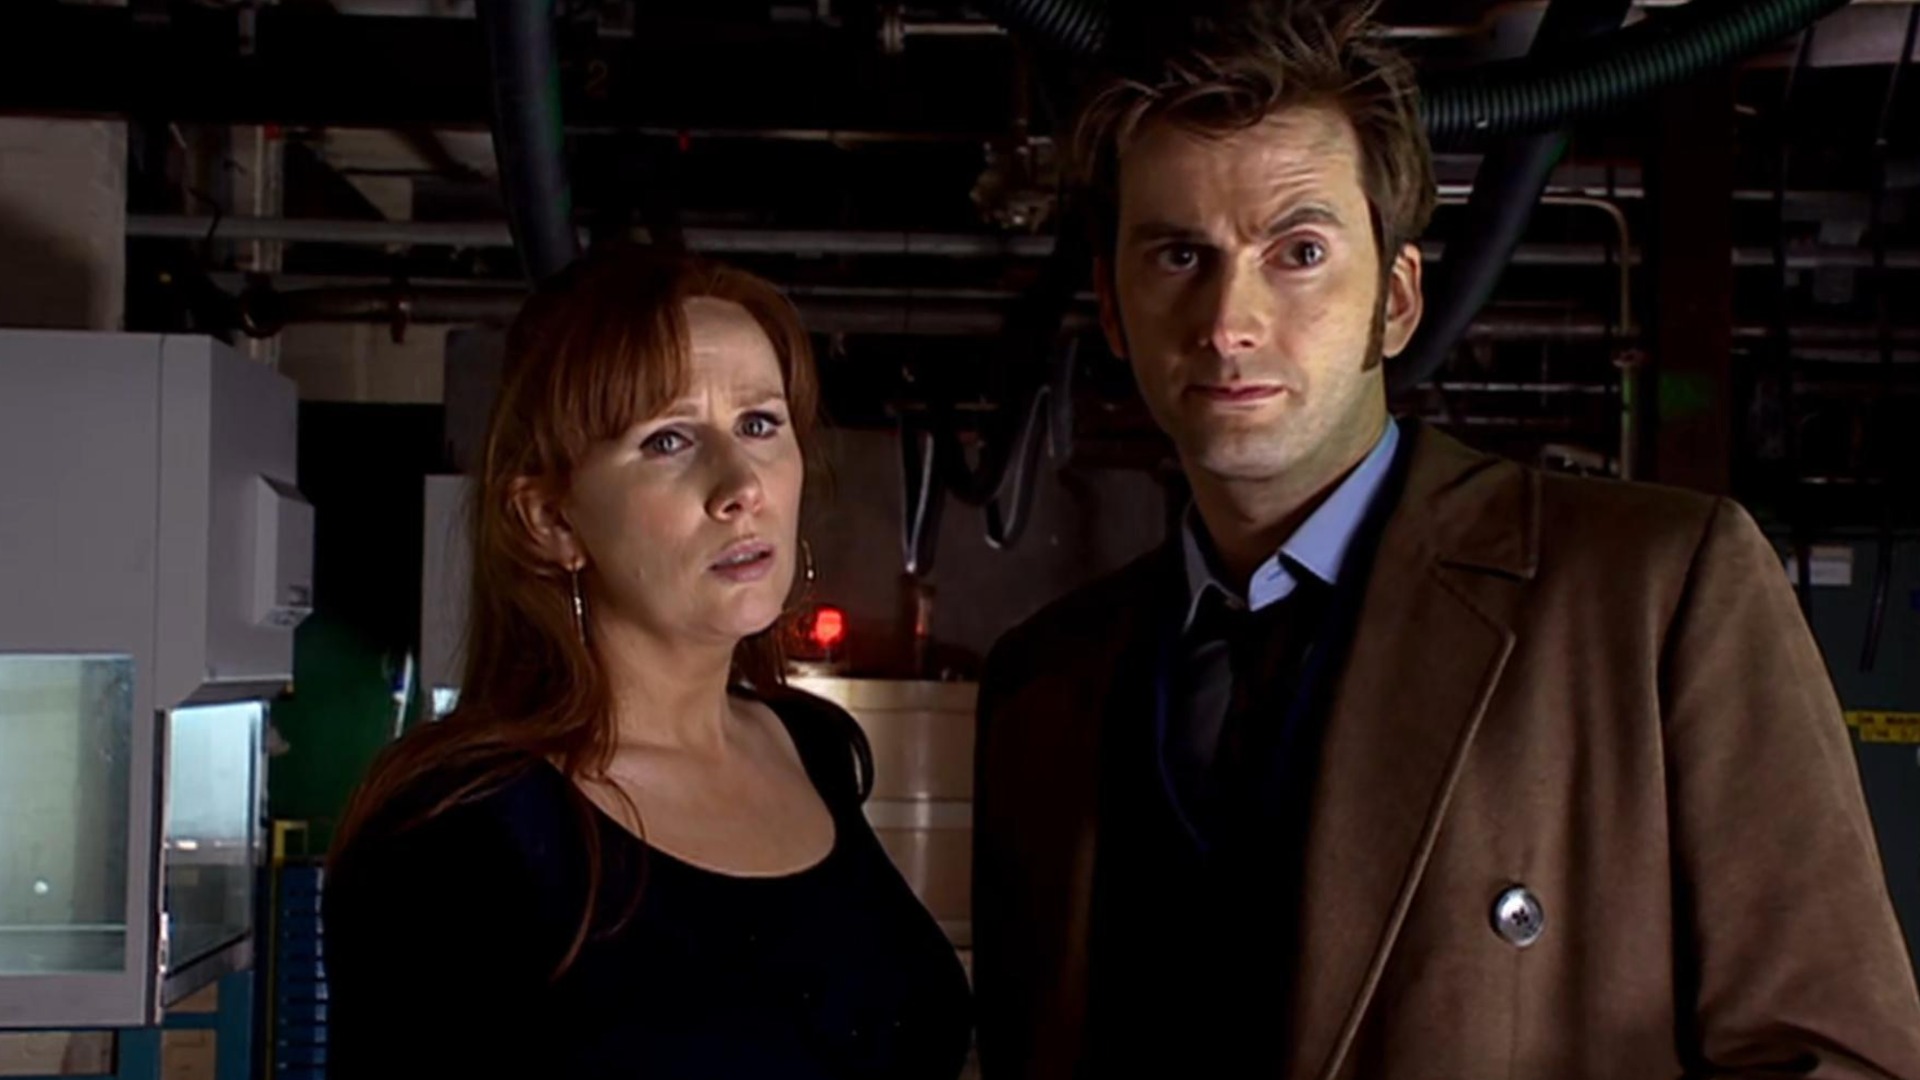 David Tennant and Catherine Tate to return to Doctor Who in 2023